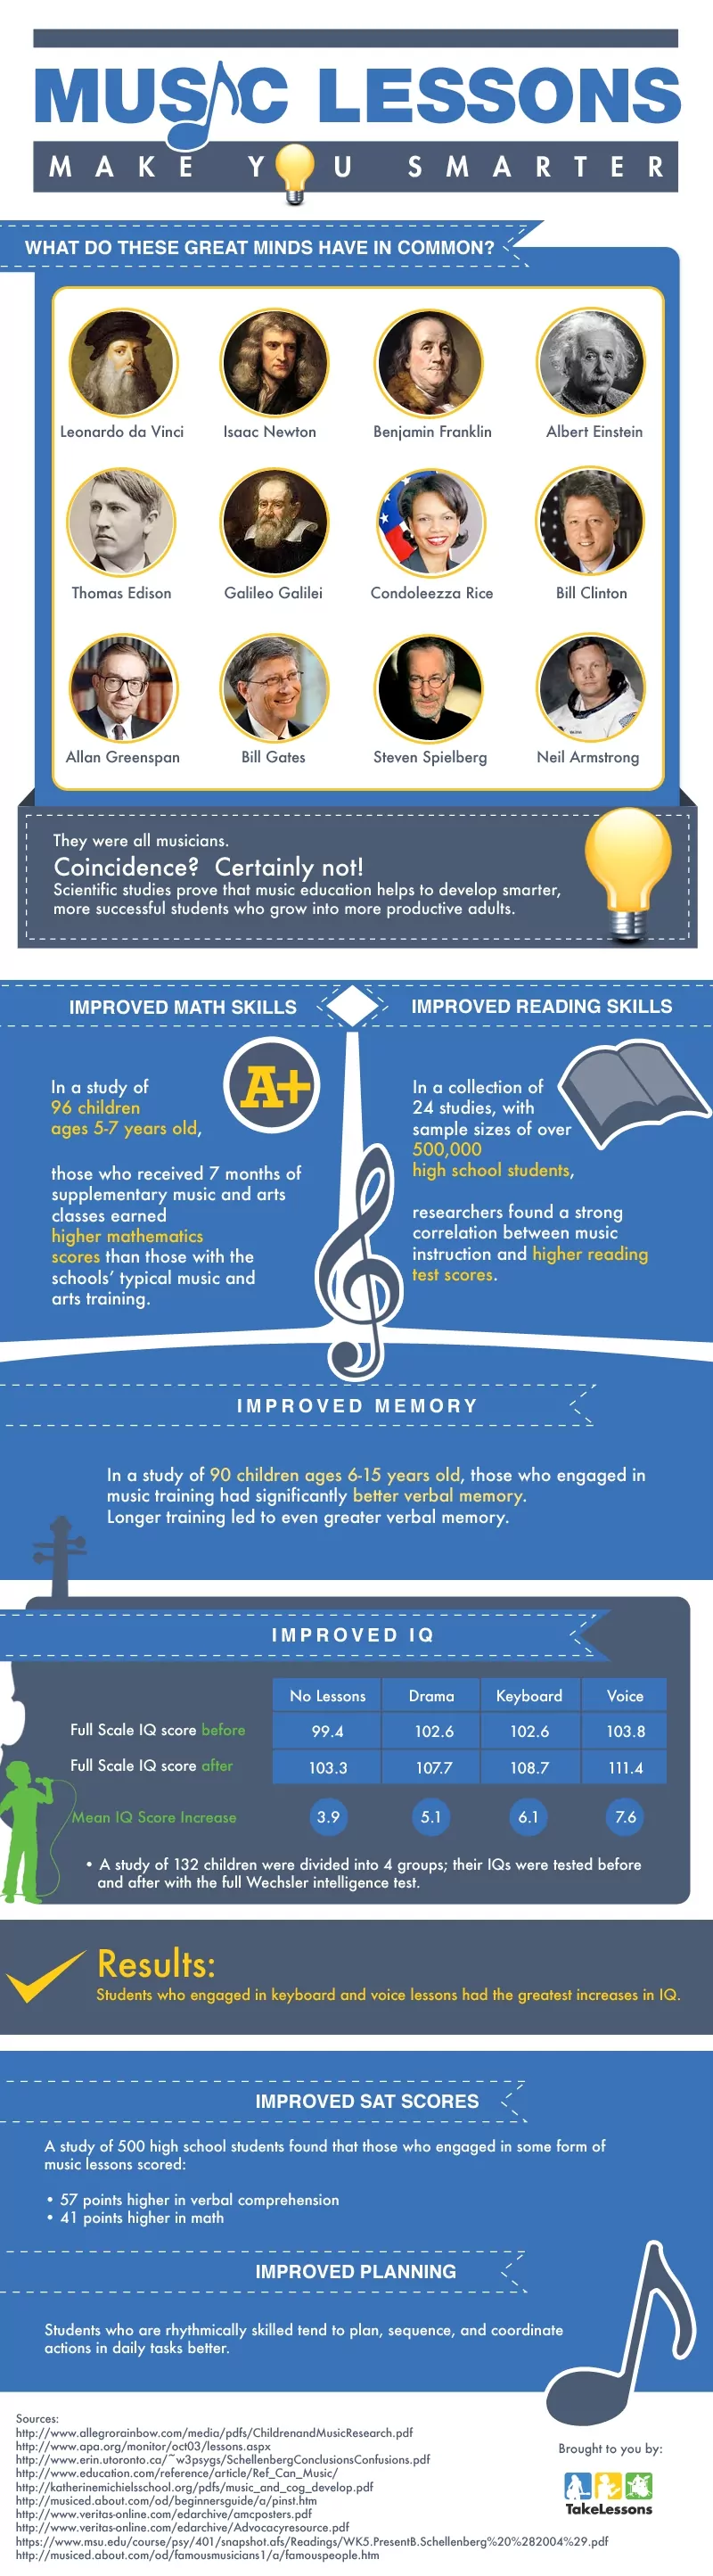 impact of music education on kids cognitive skills